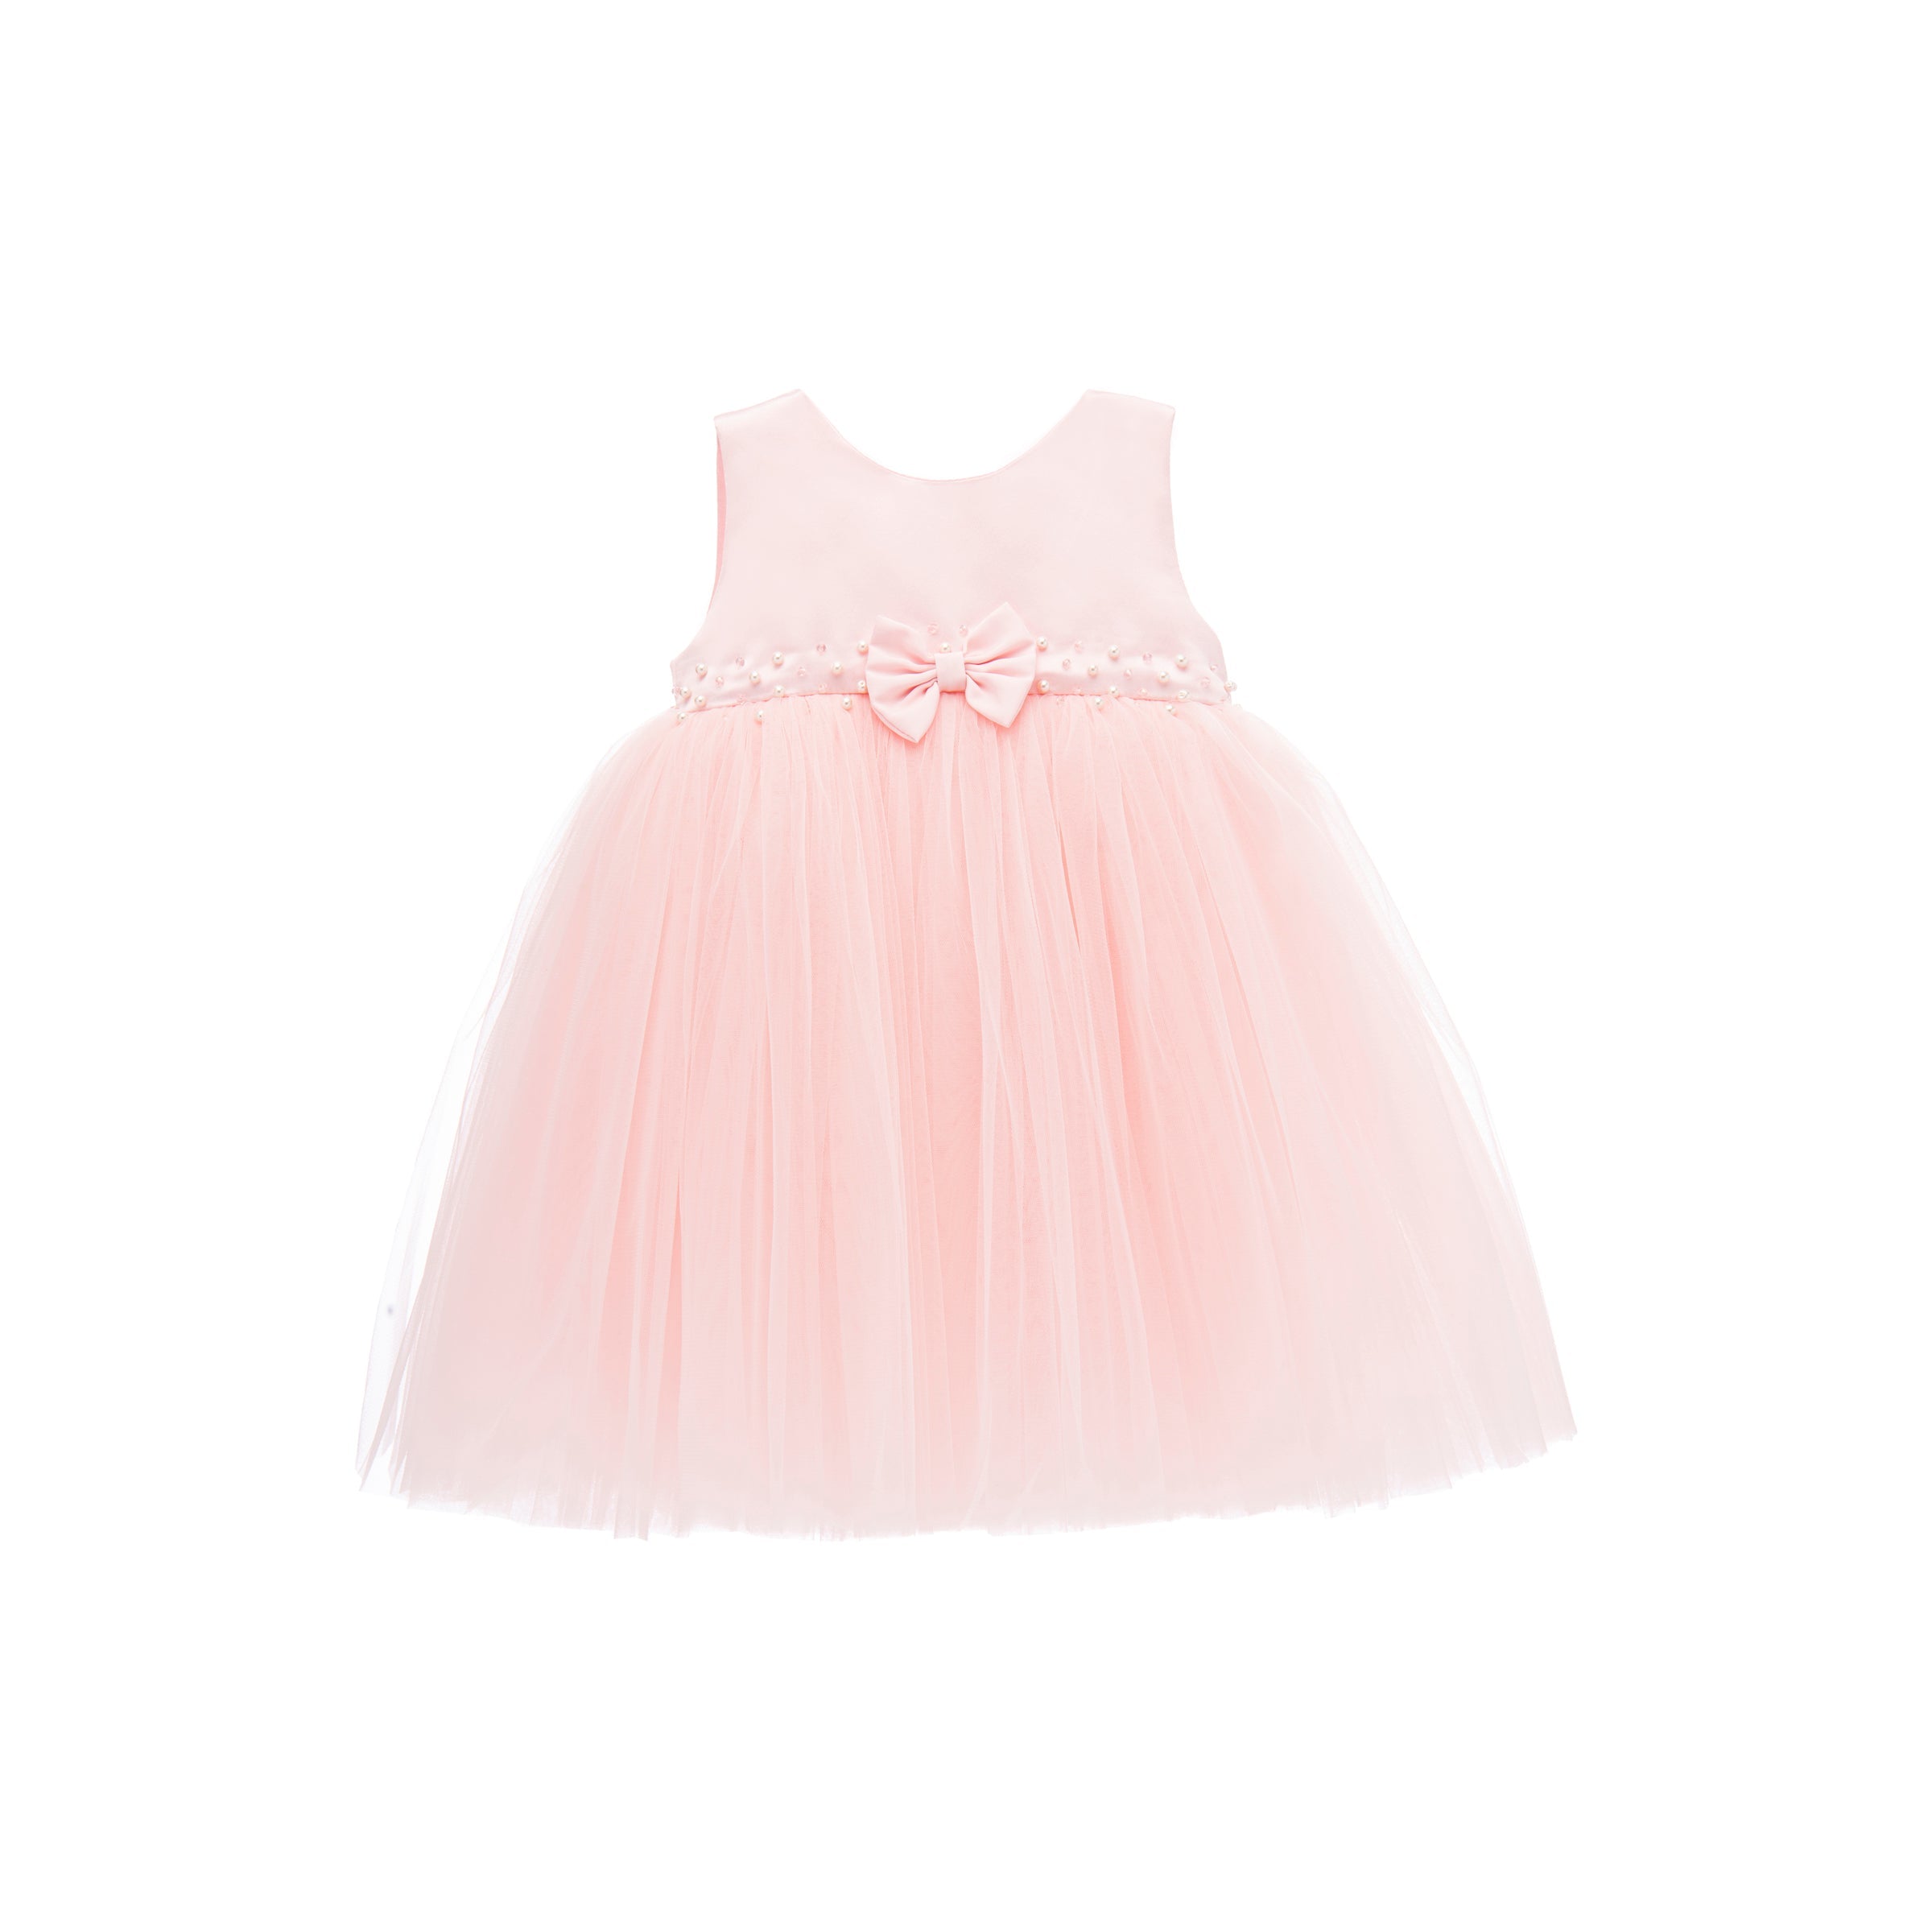 kids-atelier-tulleen-baby-girl-pink-sleeveless-floral-tulle-dress-ss19602-pink